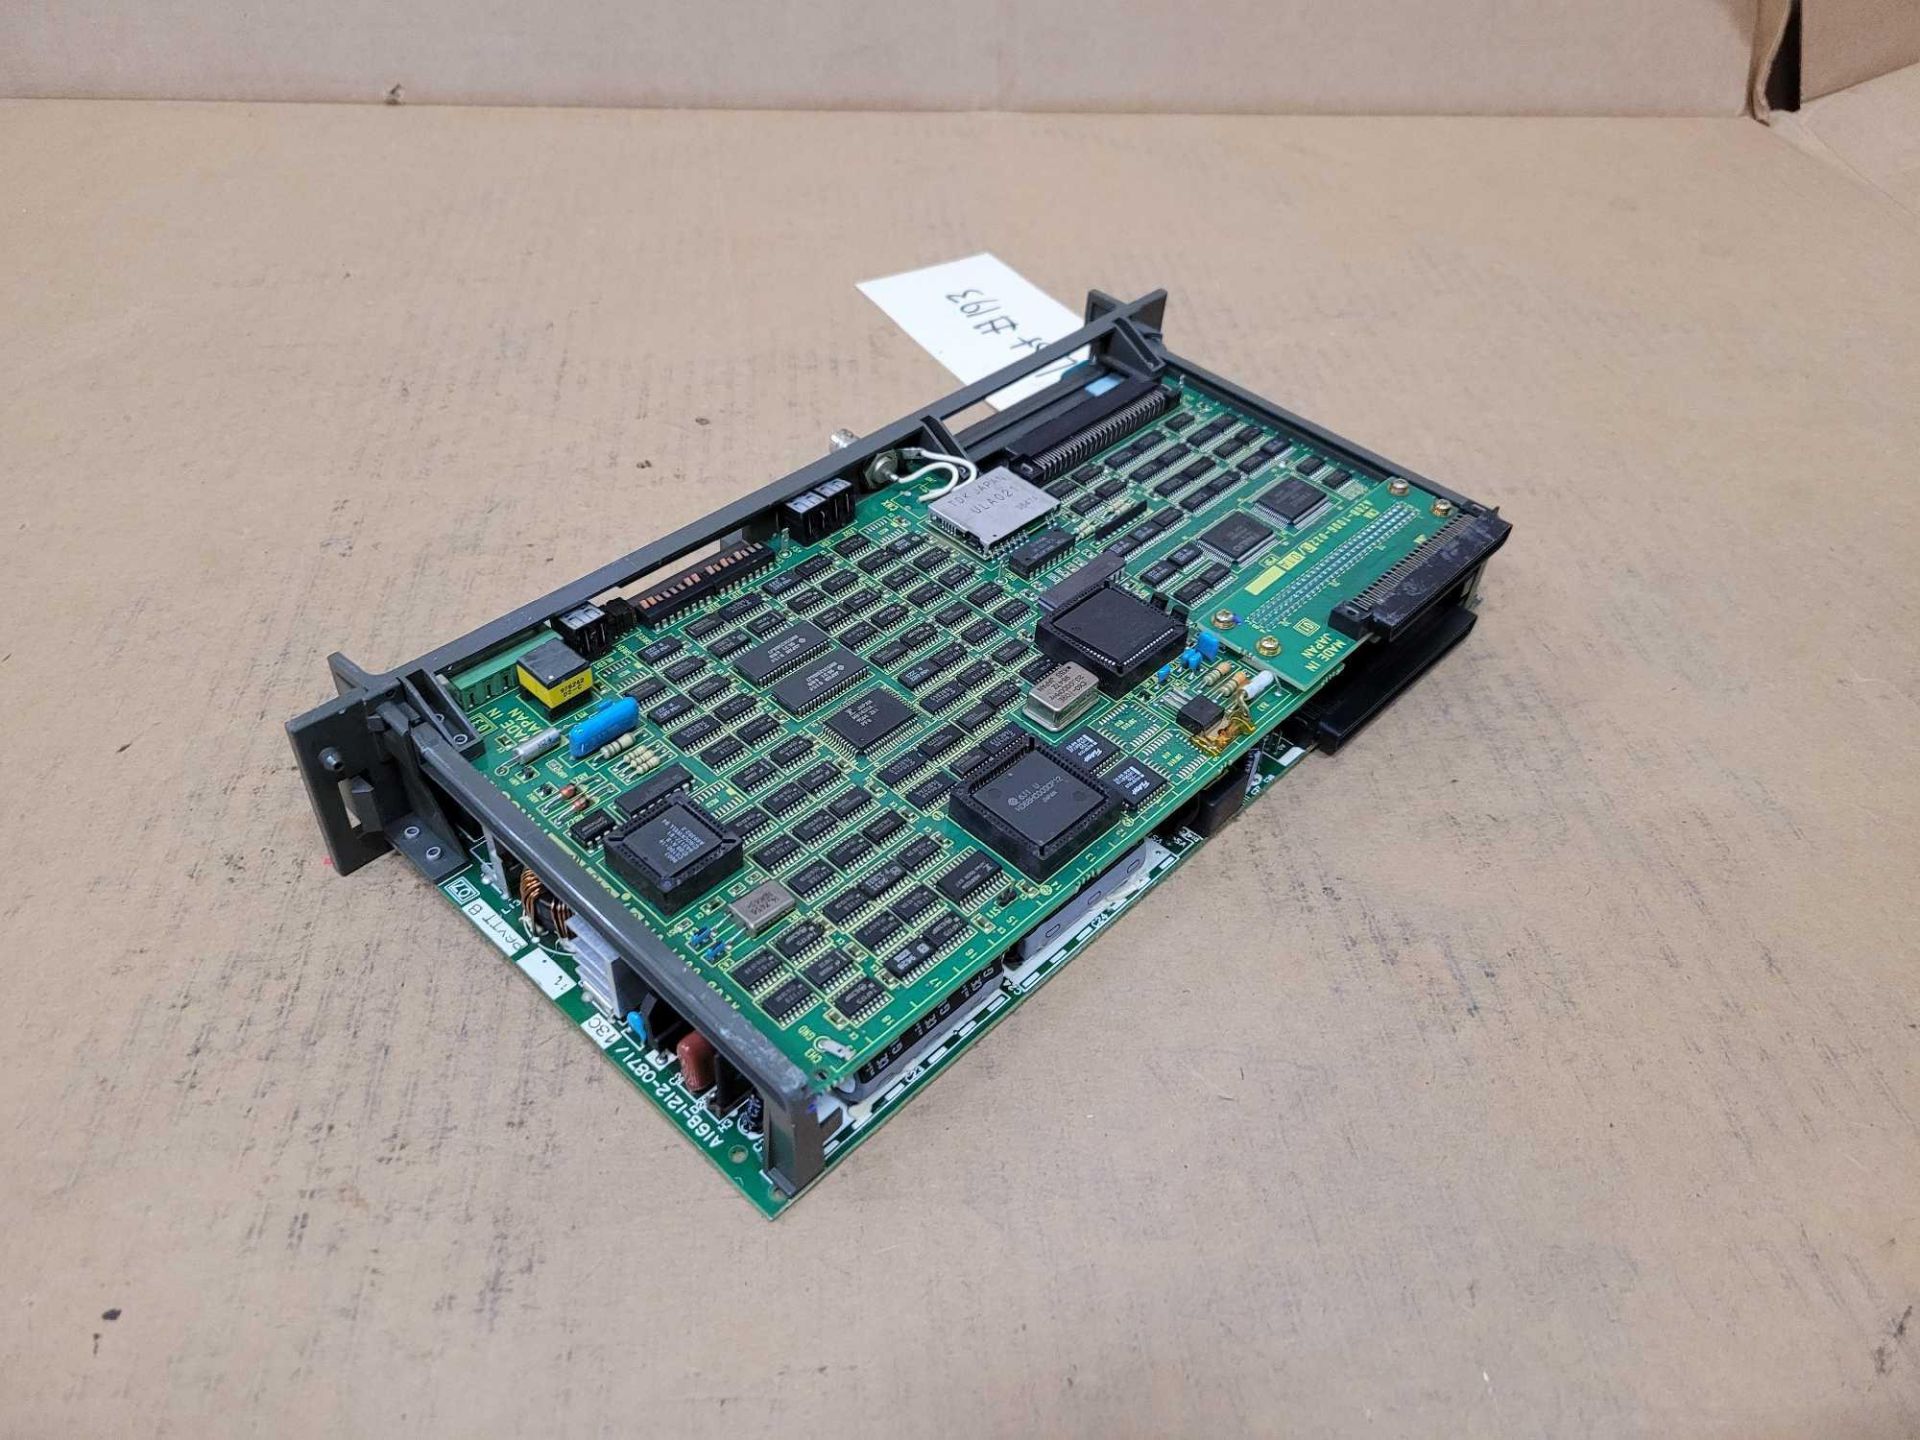 LOT OF 2 FANUC A16B-1212-0871/15C POWER SUPPLY W/ FANUC A20B-8001-0120/04B CONTROL BOARD - Image 5 of 6